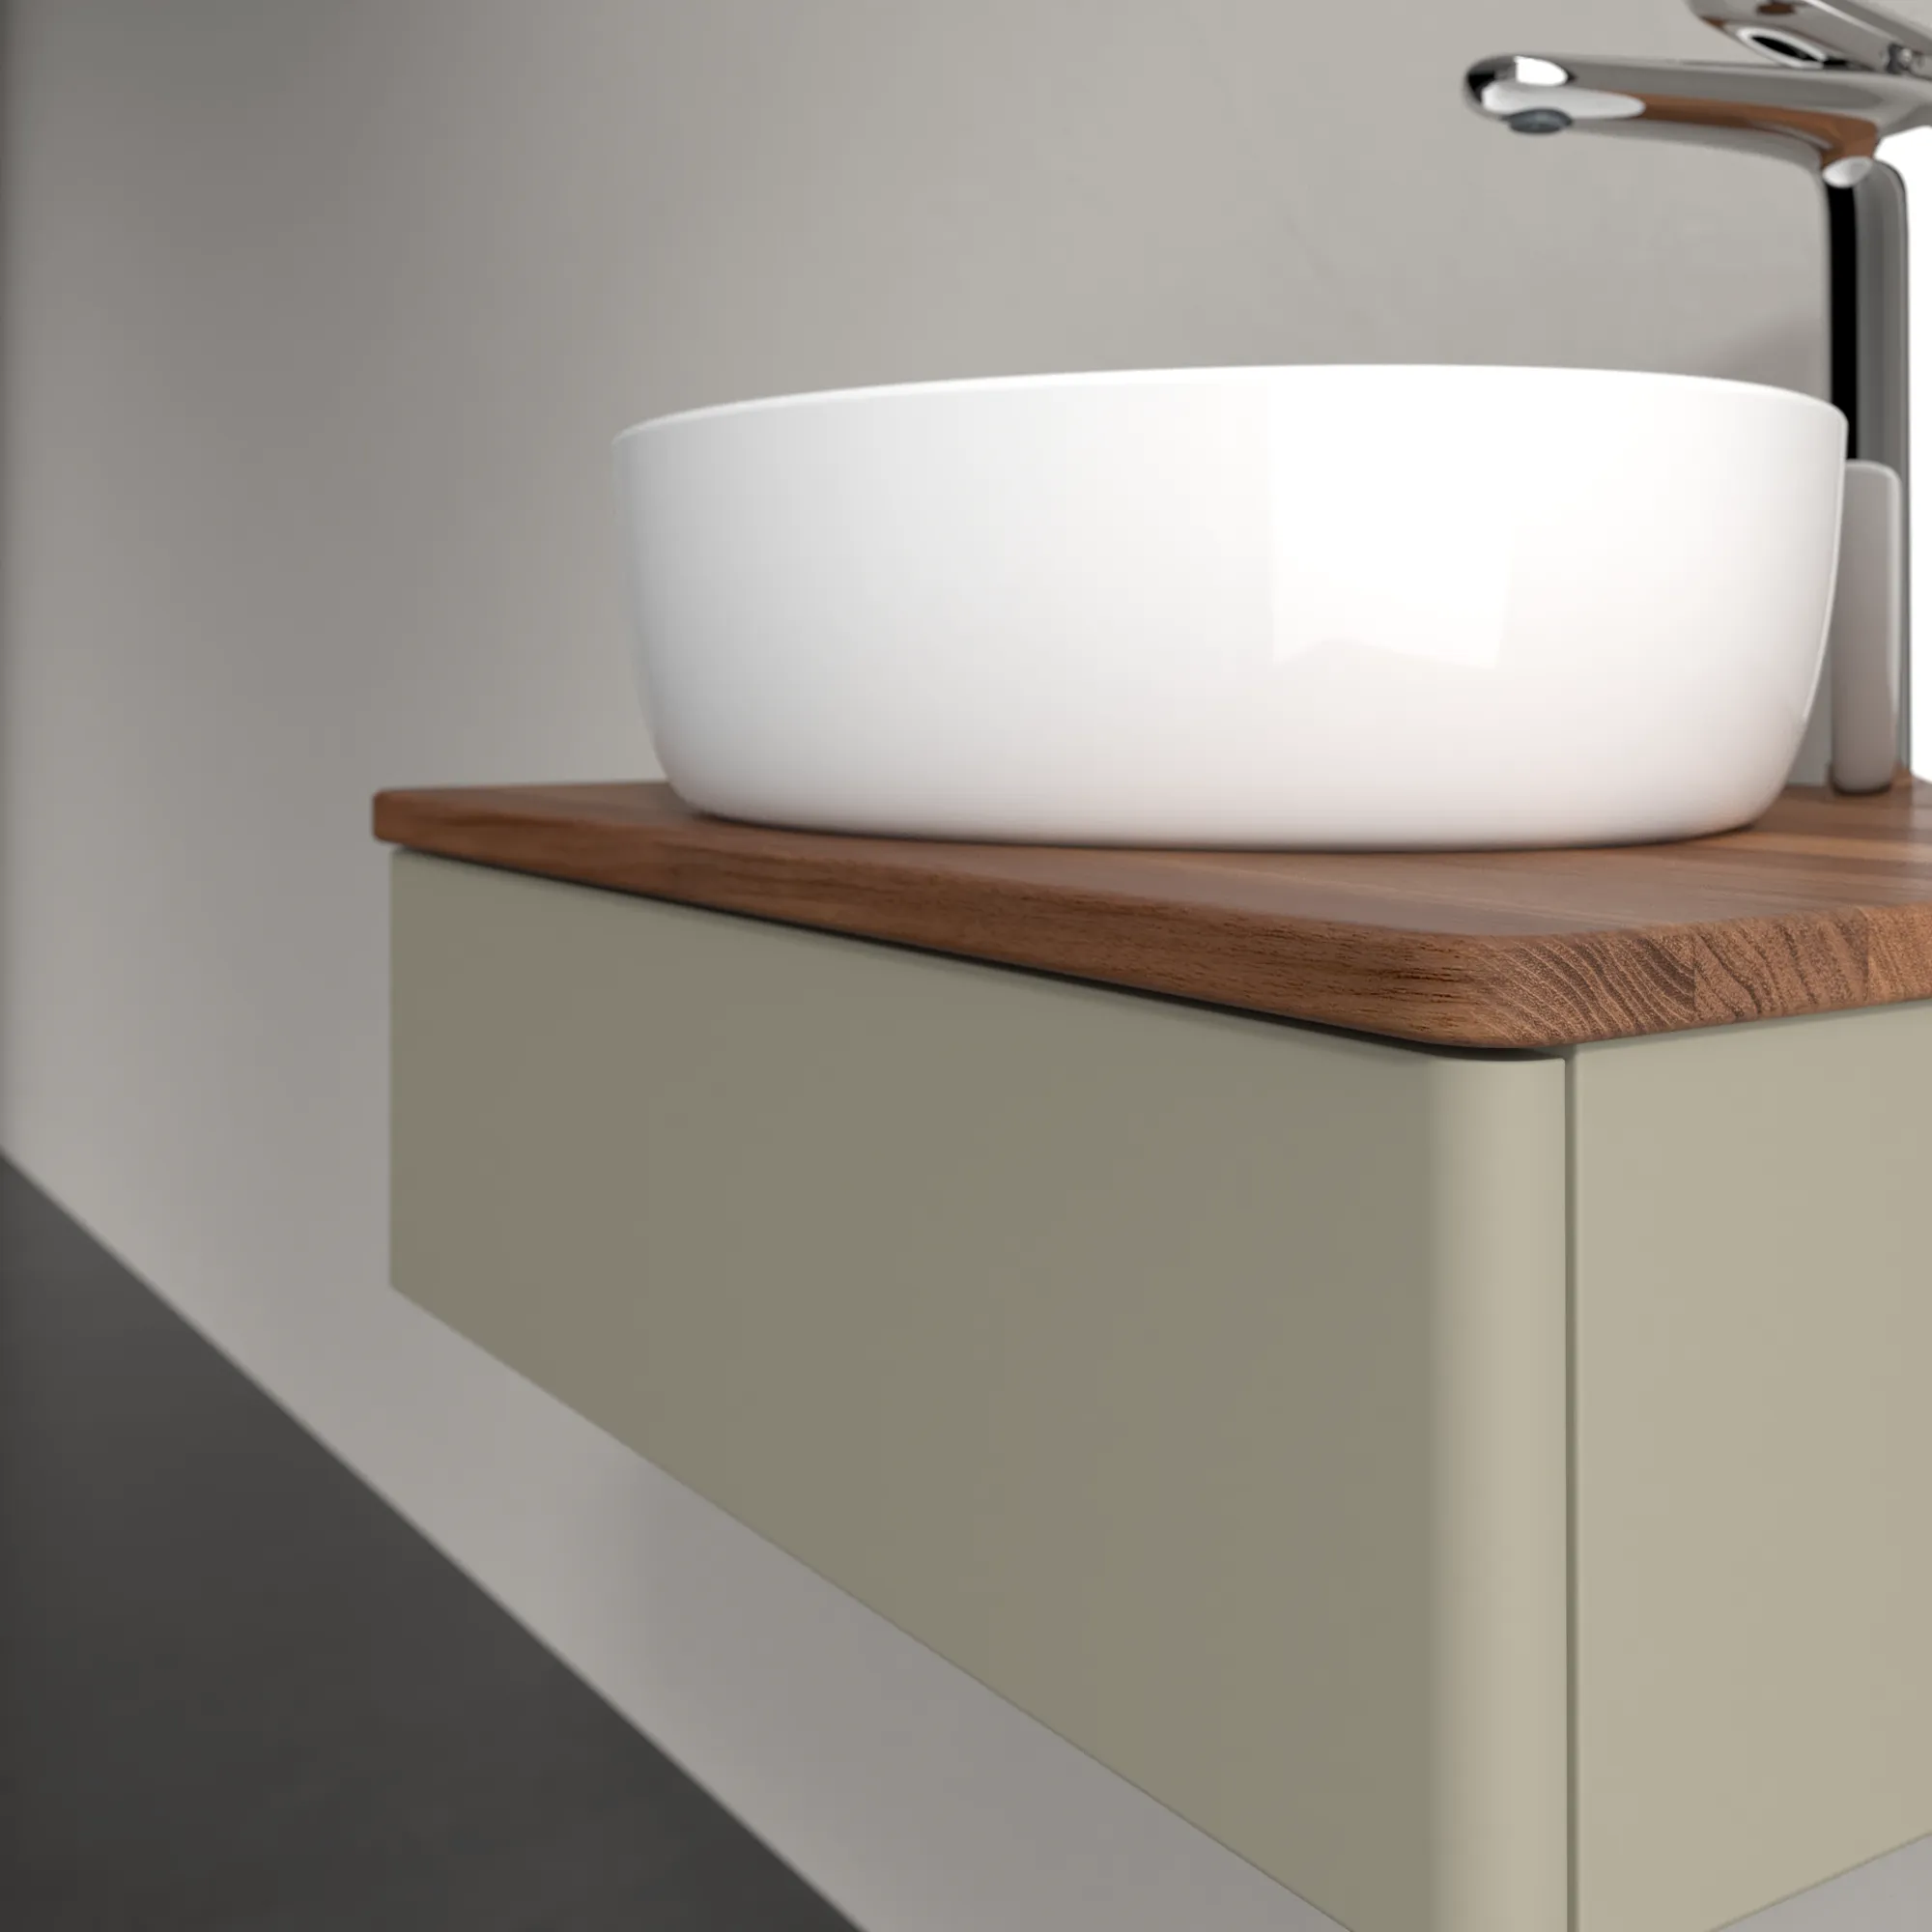 VILLEROY BOCH Antao Vanity unit, with lighting, 1 pull-out compartment, 600 x 190 x 500 mm, Front without structure, Stone Grey Matt Lacquer / Warm Walnut #L07052HK resmi